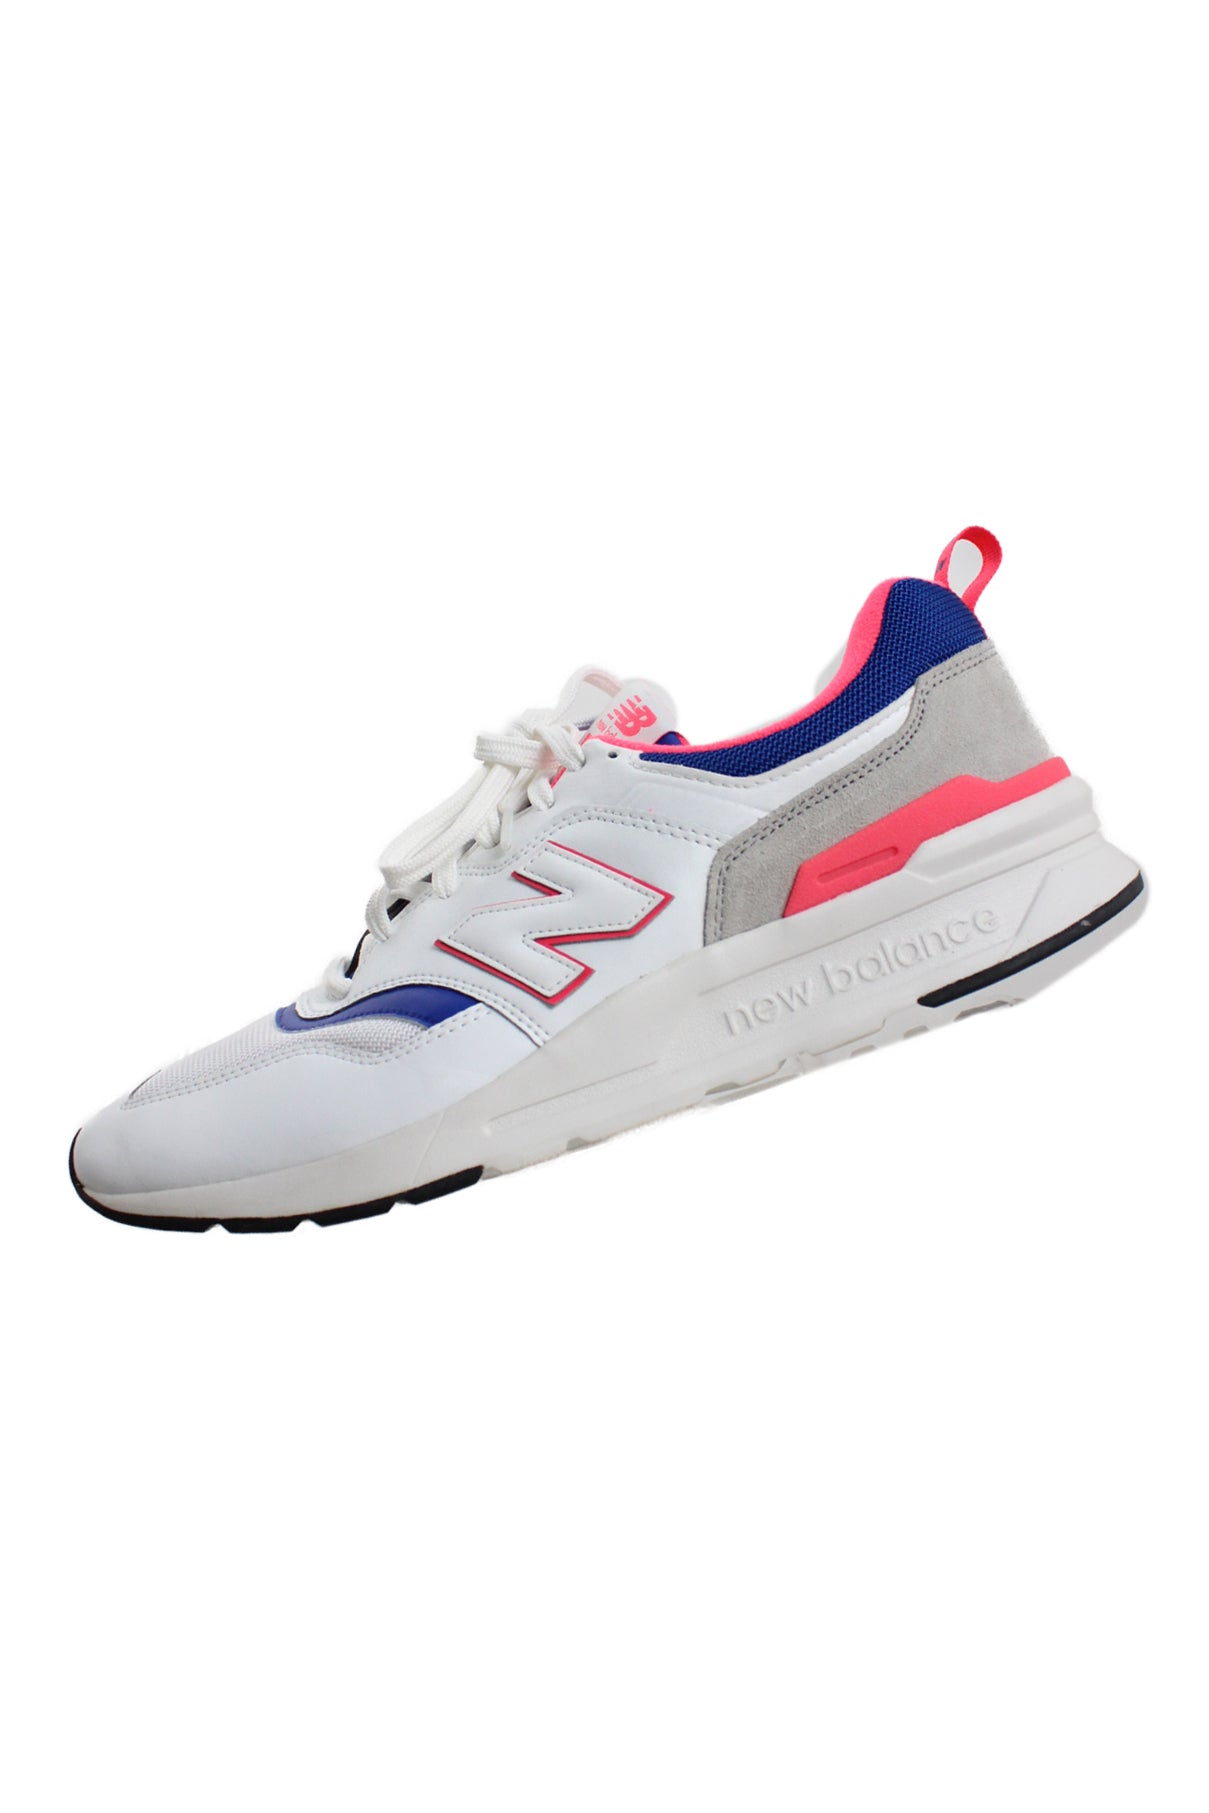 left side view of new balance white/blue/neon pink ‘997h’ leather/textile shoes. features ‘new balance 997h’ logo tag at tongues, ‘n’ logo at uppers sides, ‘new balance’ logo at soles sides, top flat lace closure, and pull tab at heel.